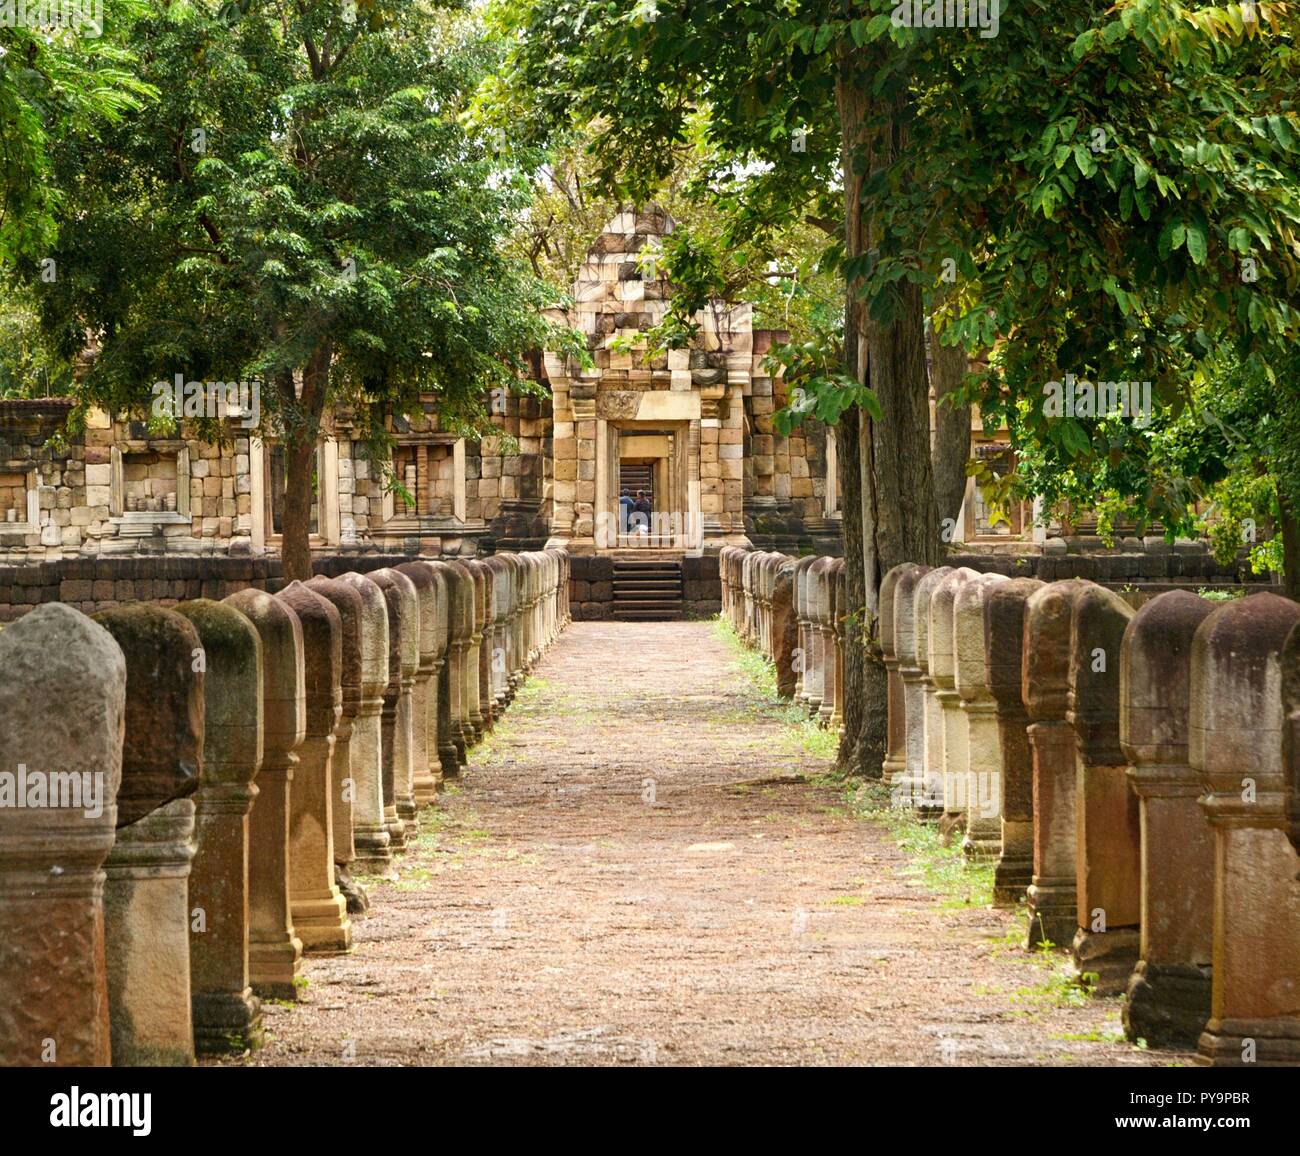 Laterite stone paved walkway with stone posts to the gates of 11th-century ancient Khmer temple Prasat Sdok Kok Thom in Sa Kaeo province of Thailand Stock Photo